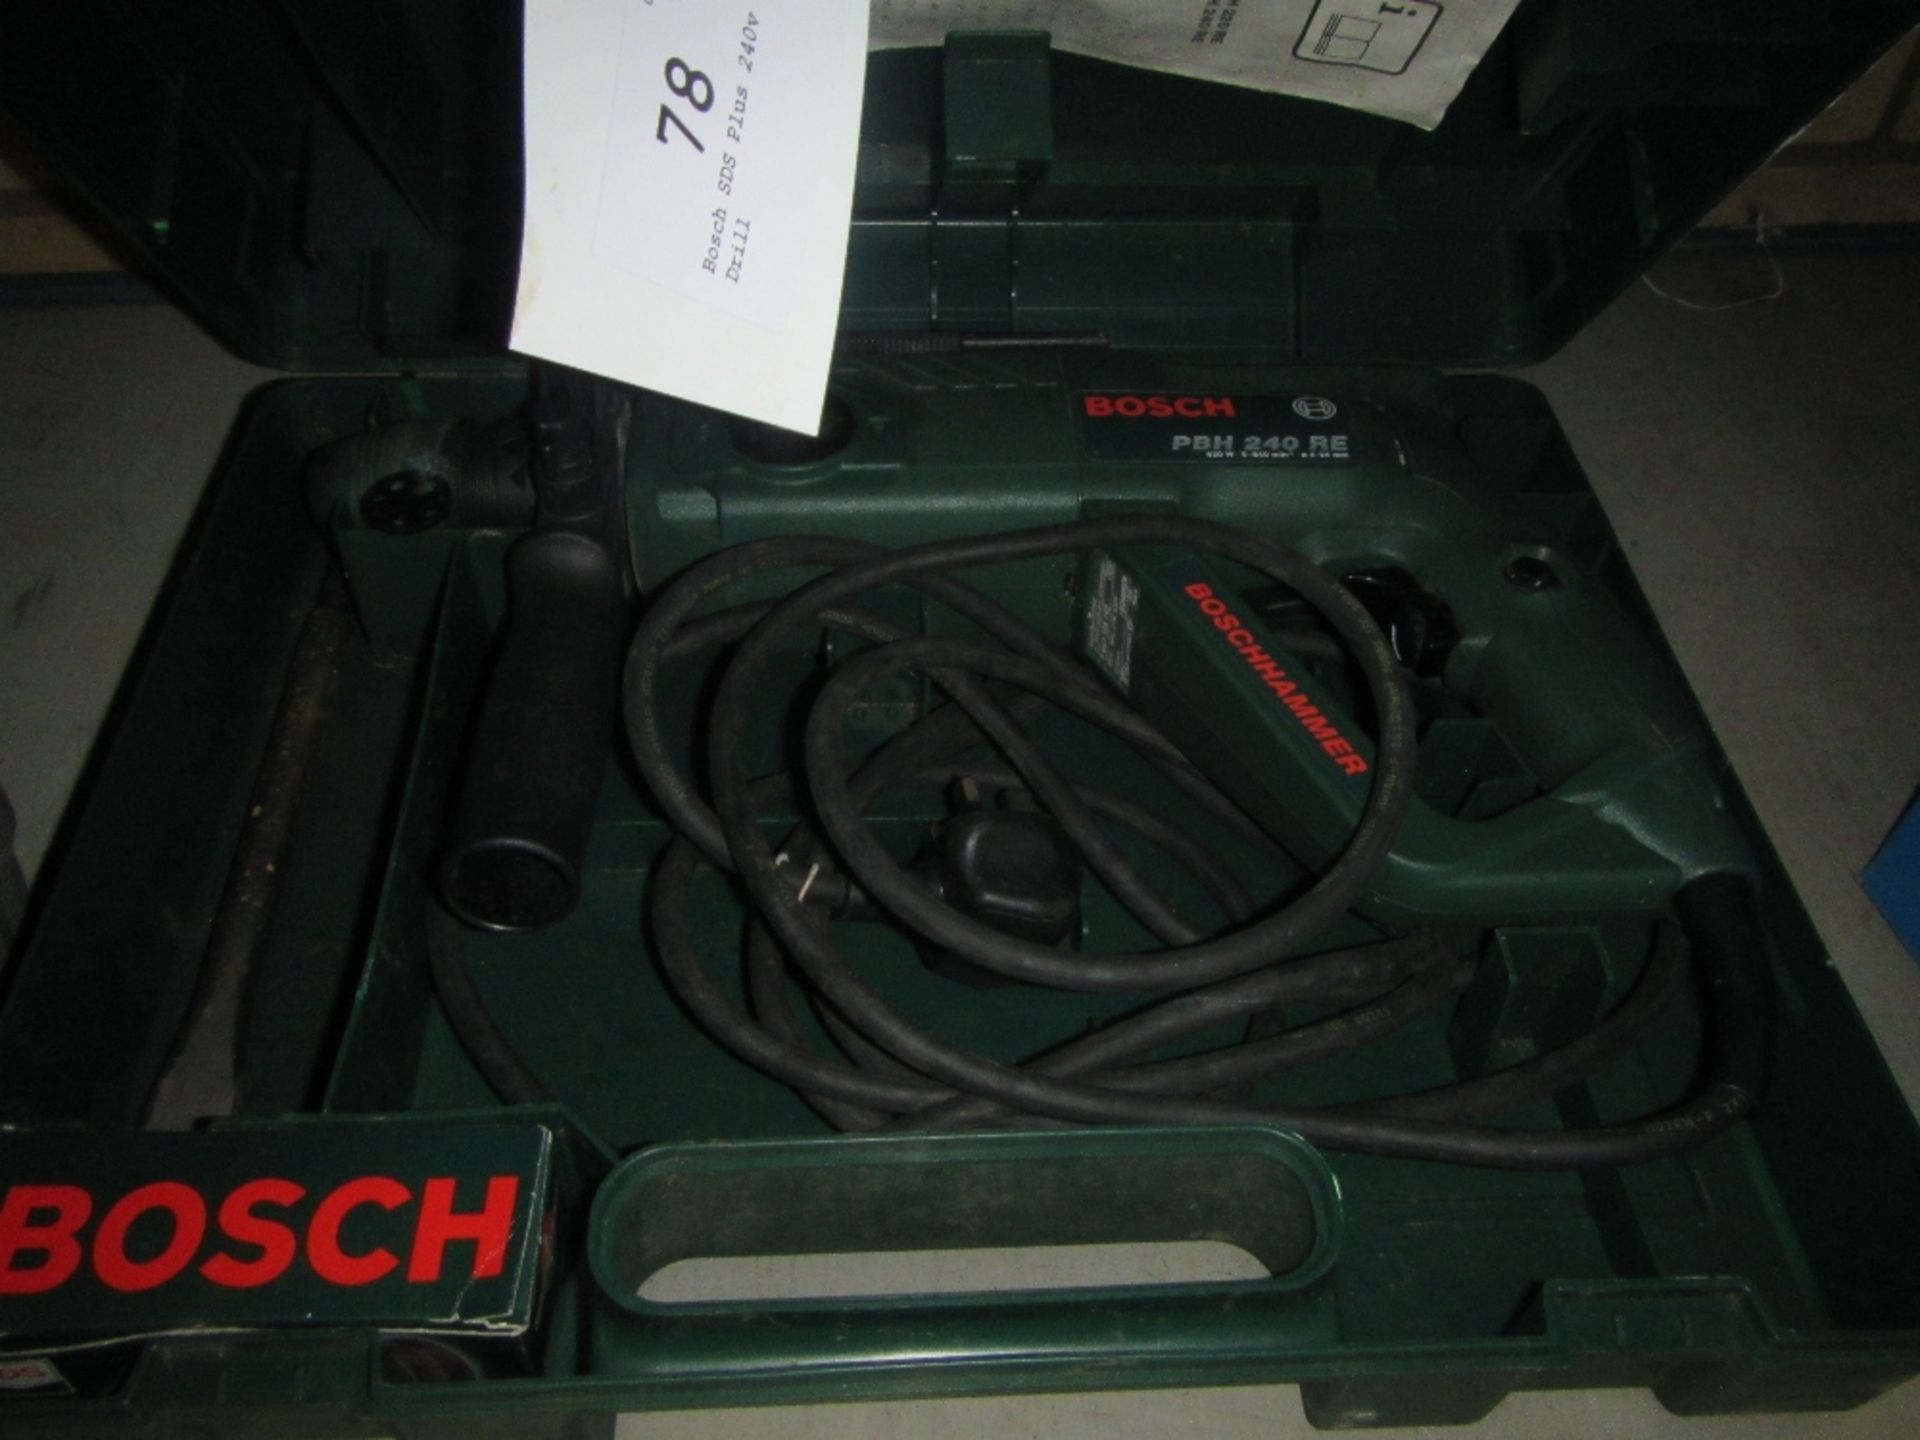 Bosch SDS Plus 240v Drill UNRESERVED LOT